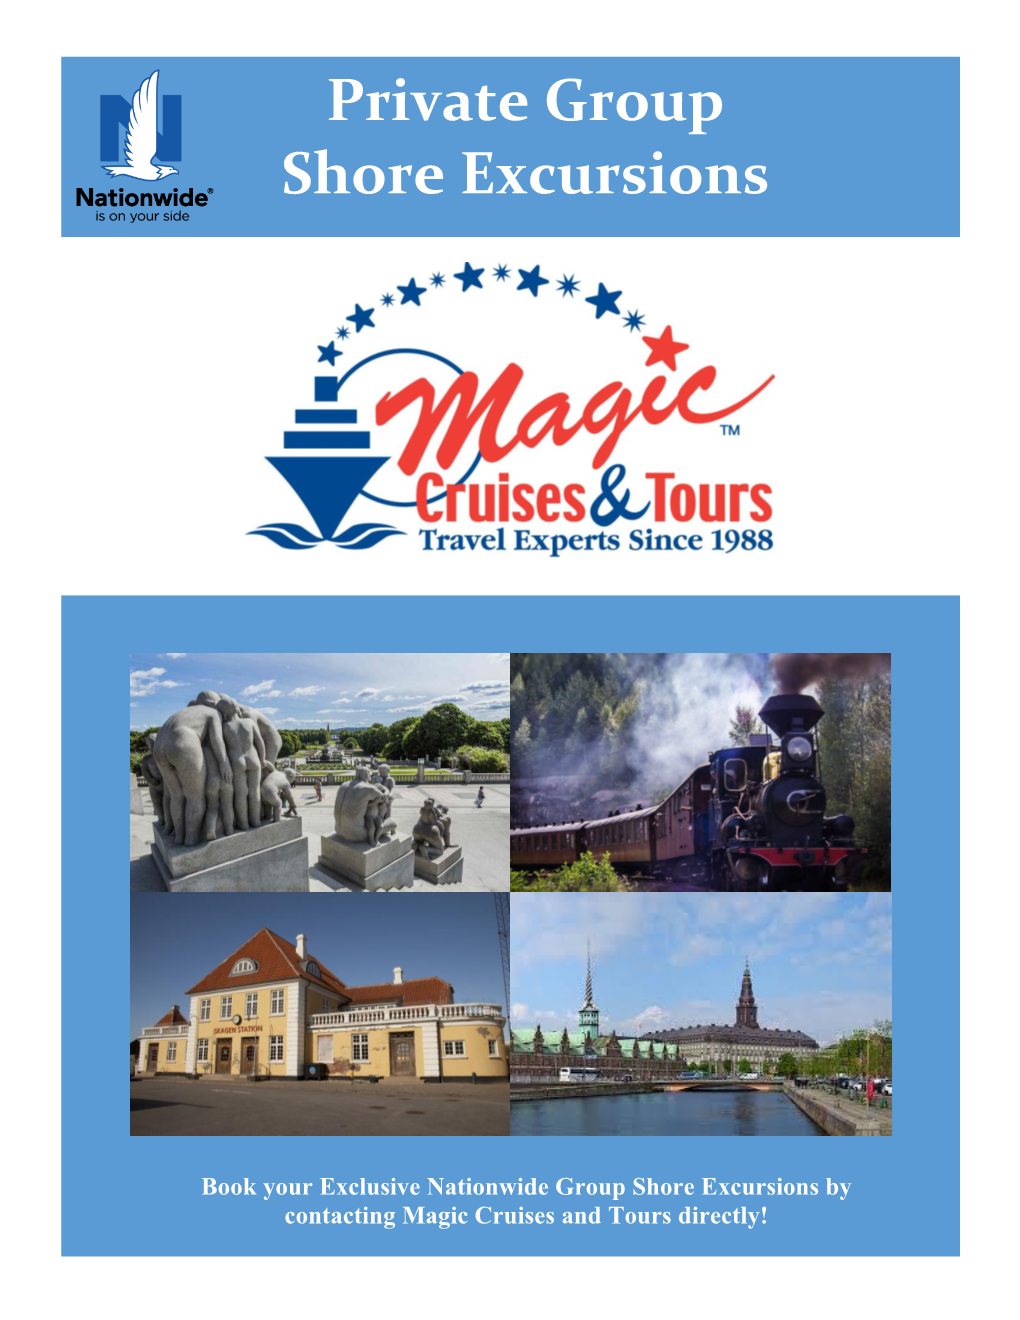 Private Group Shore Excursions